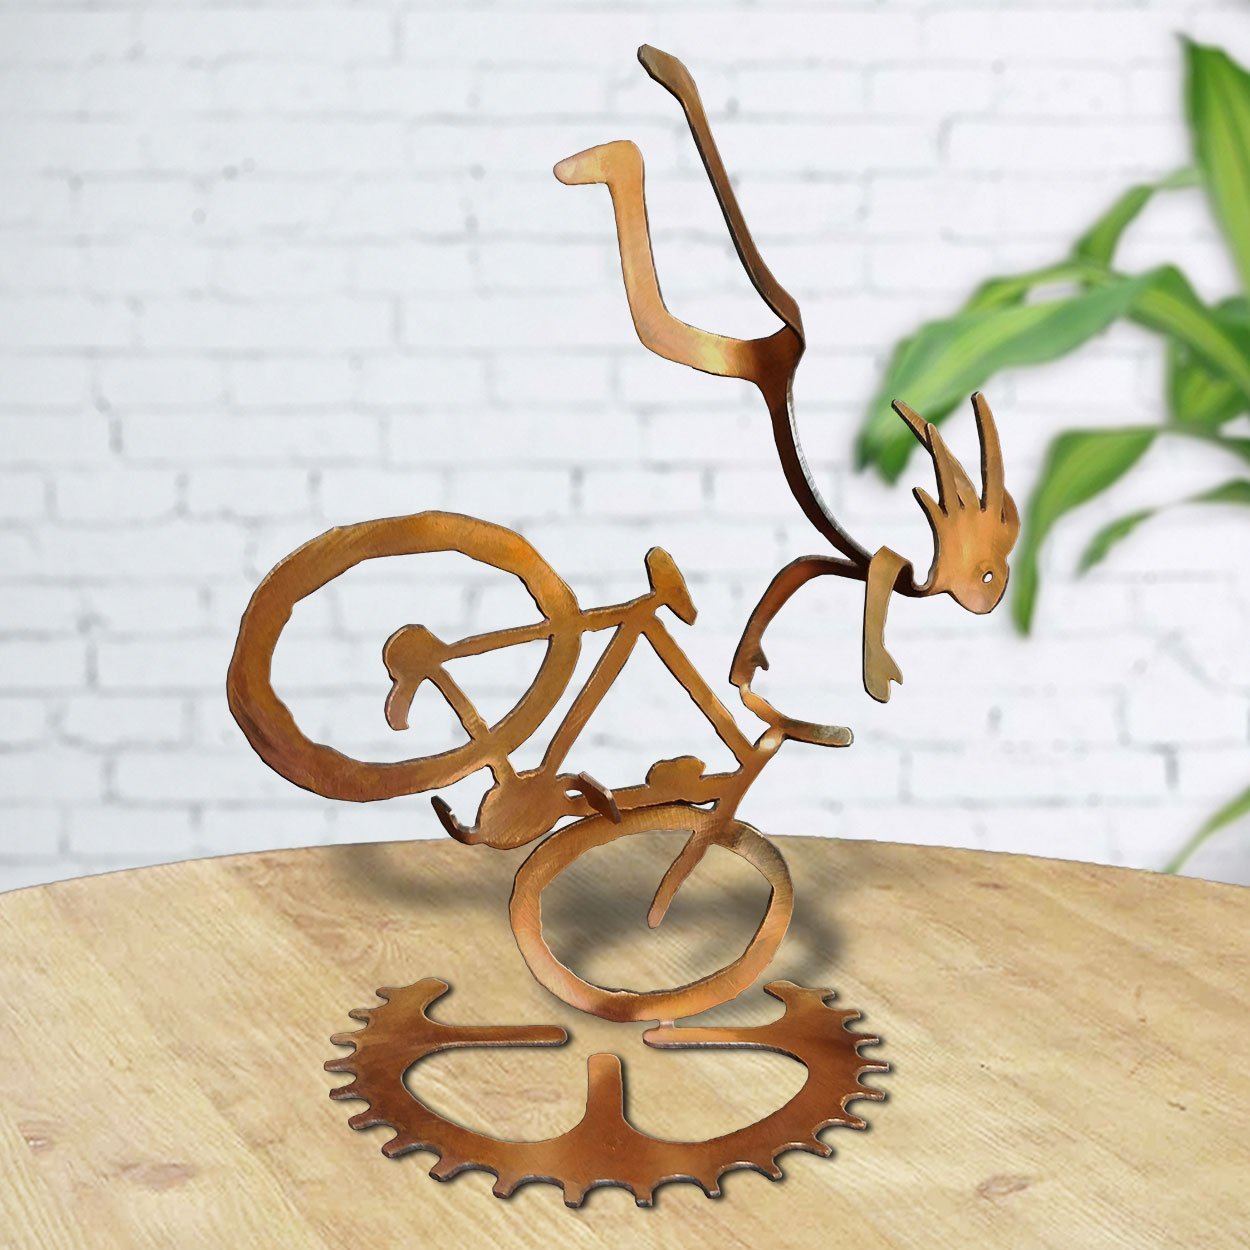 165802 - BS03RT13 14in Mr. Endo Male Kokopelli Cyclist Tabletop Sculpture